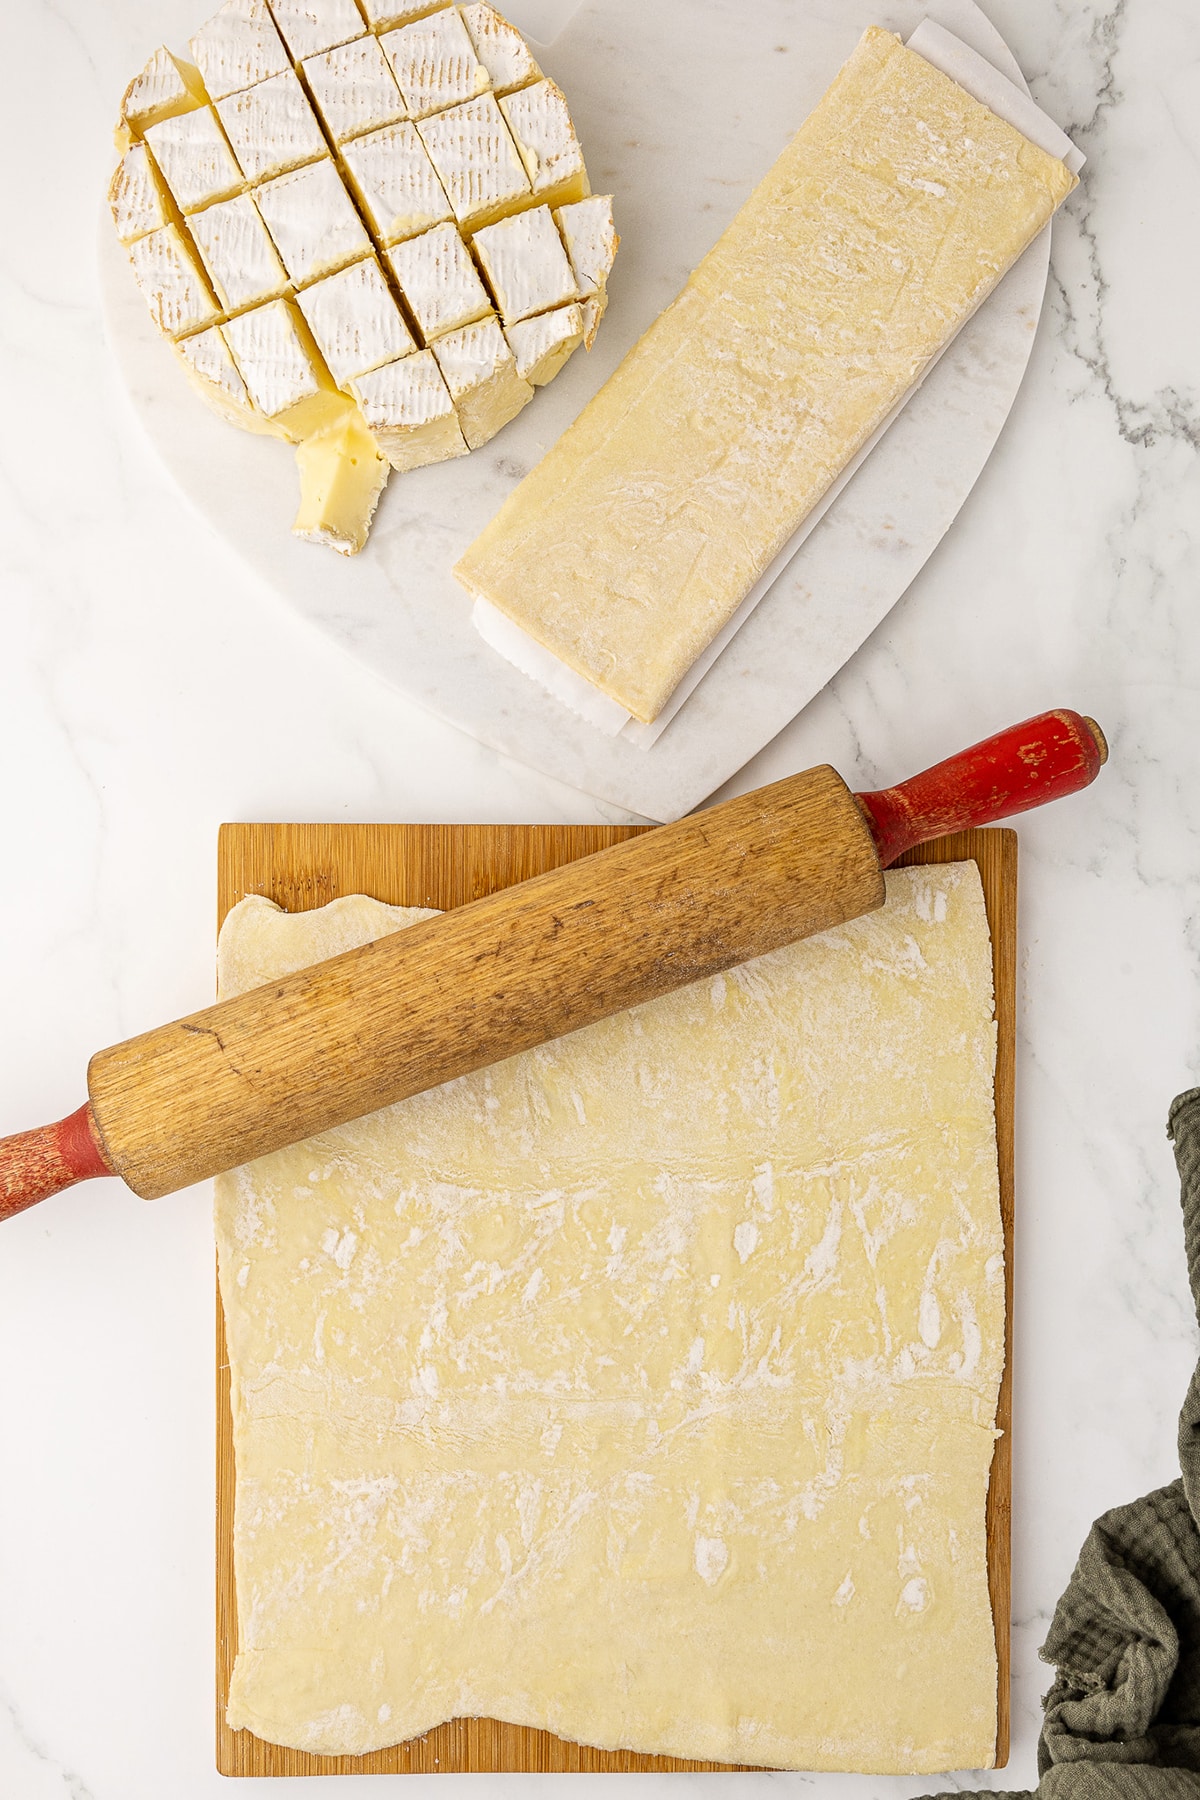 puff pastry being rolled out with a rolling pin on a wood cutting board, with cubed brie and another puff pastry sheet in the background